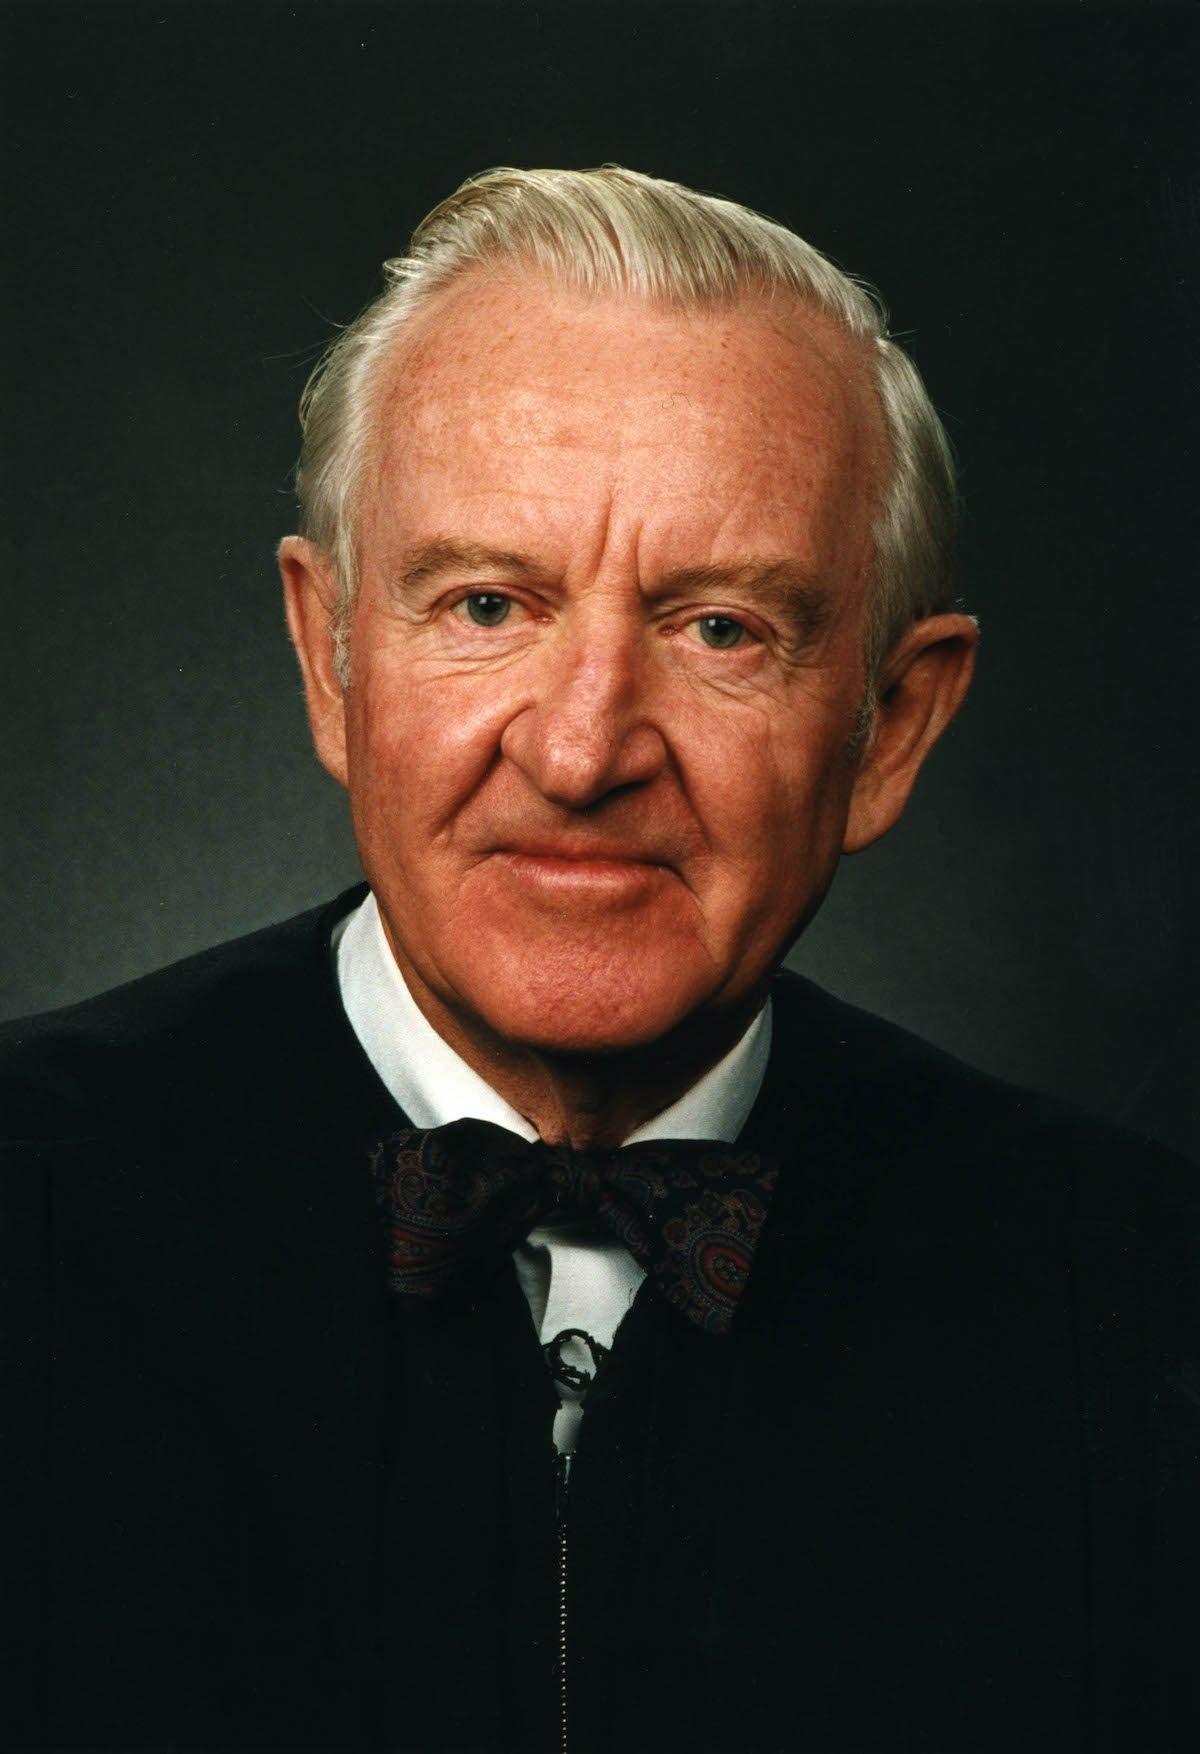 This undated file photo shows Justice John Paul Stevens of the Supreme Court of the United States in Washington, DC. (Photo by Liaison via Getty Images